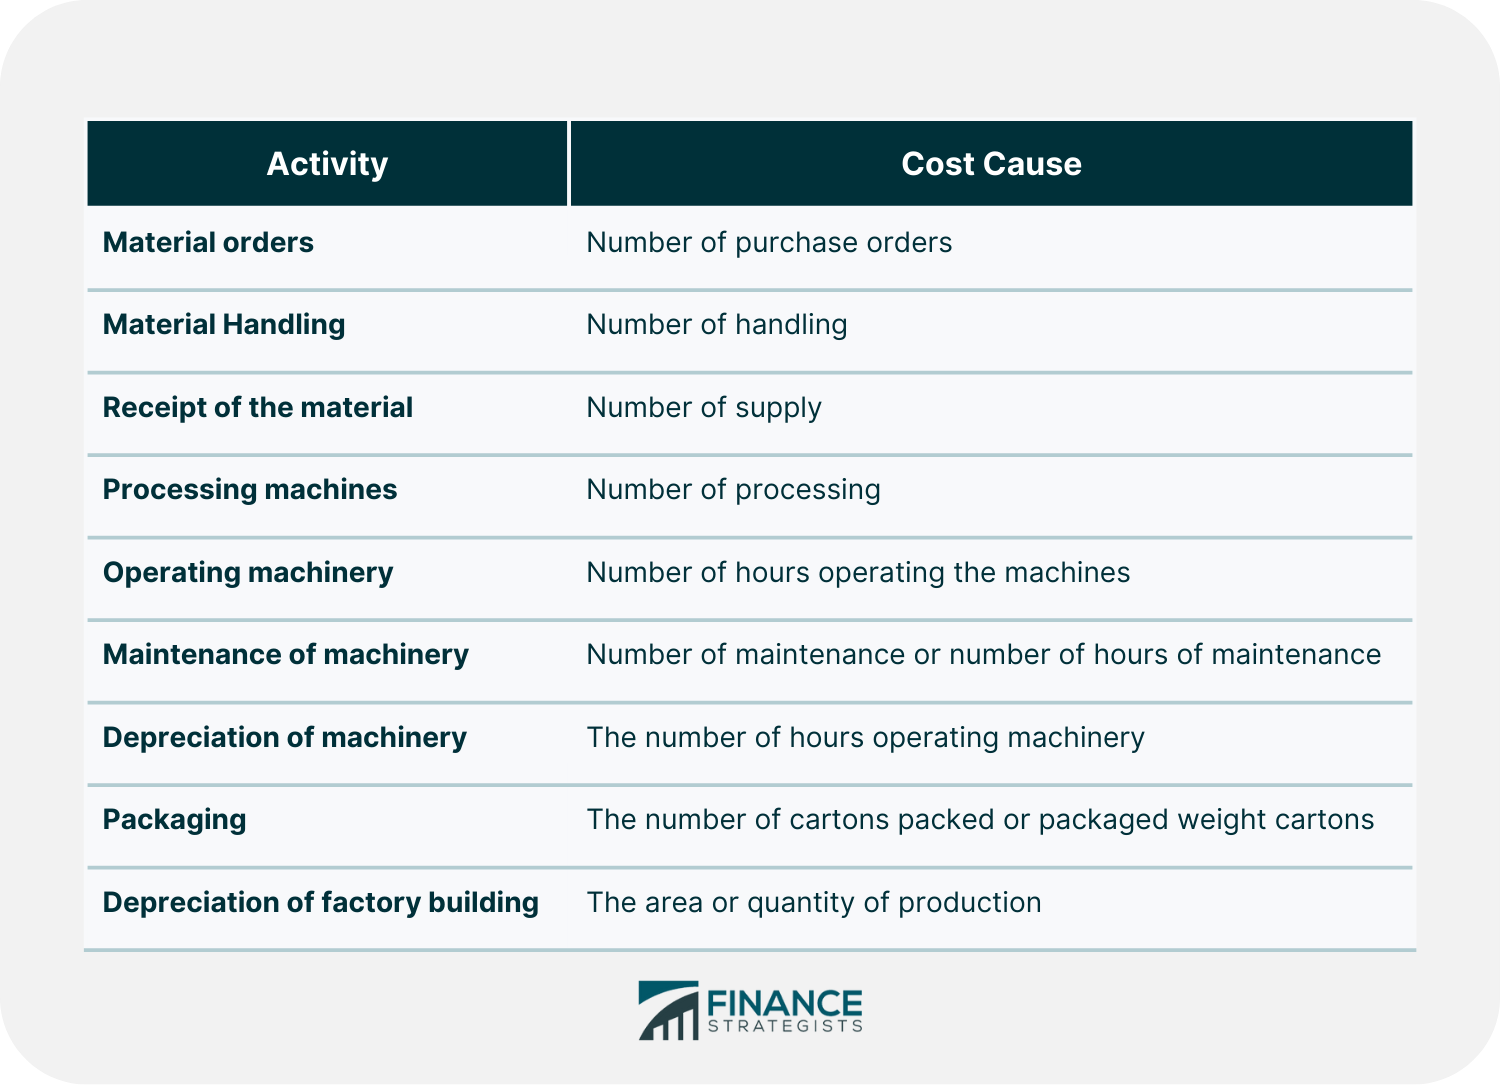 TABLE1-some examples of the causes of cost for some